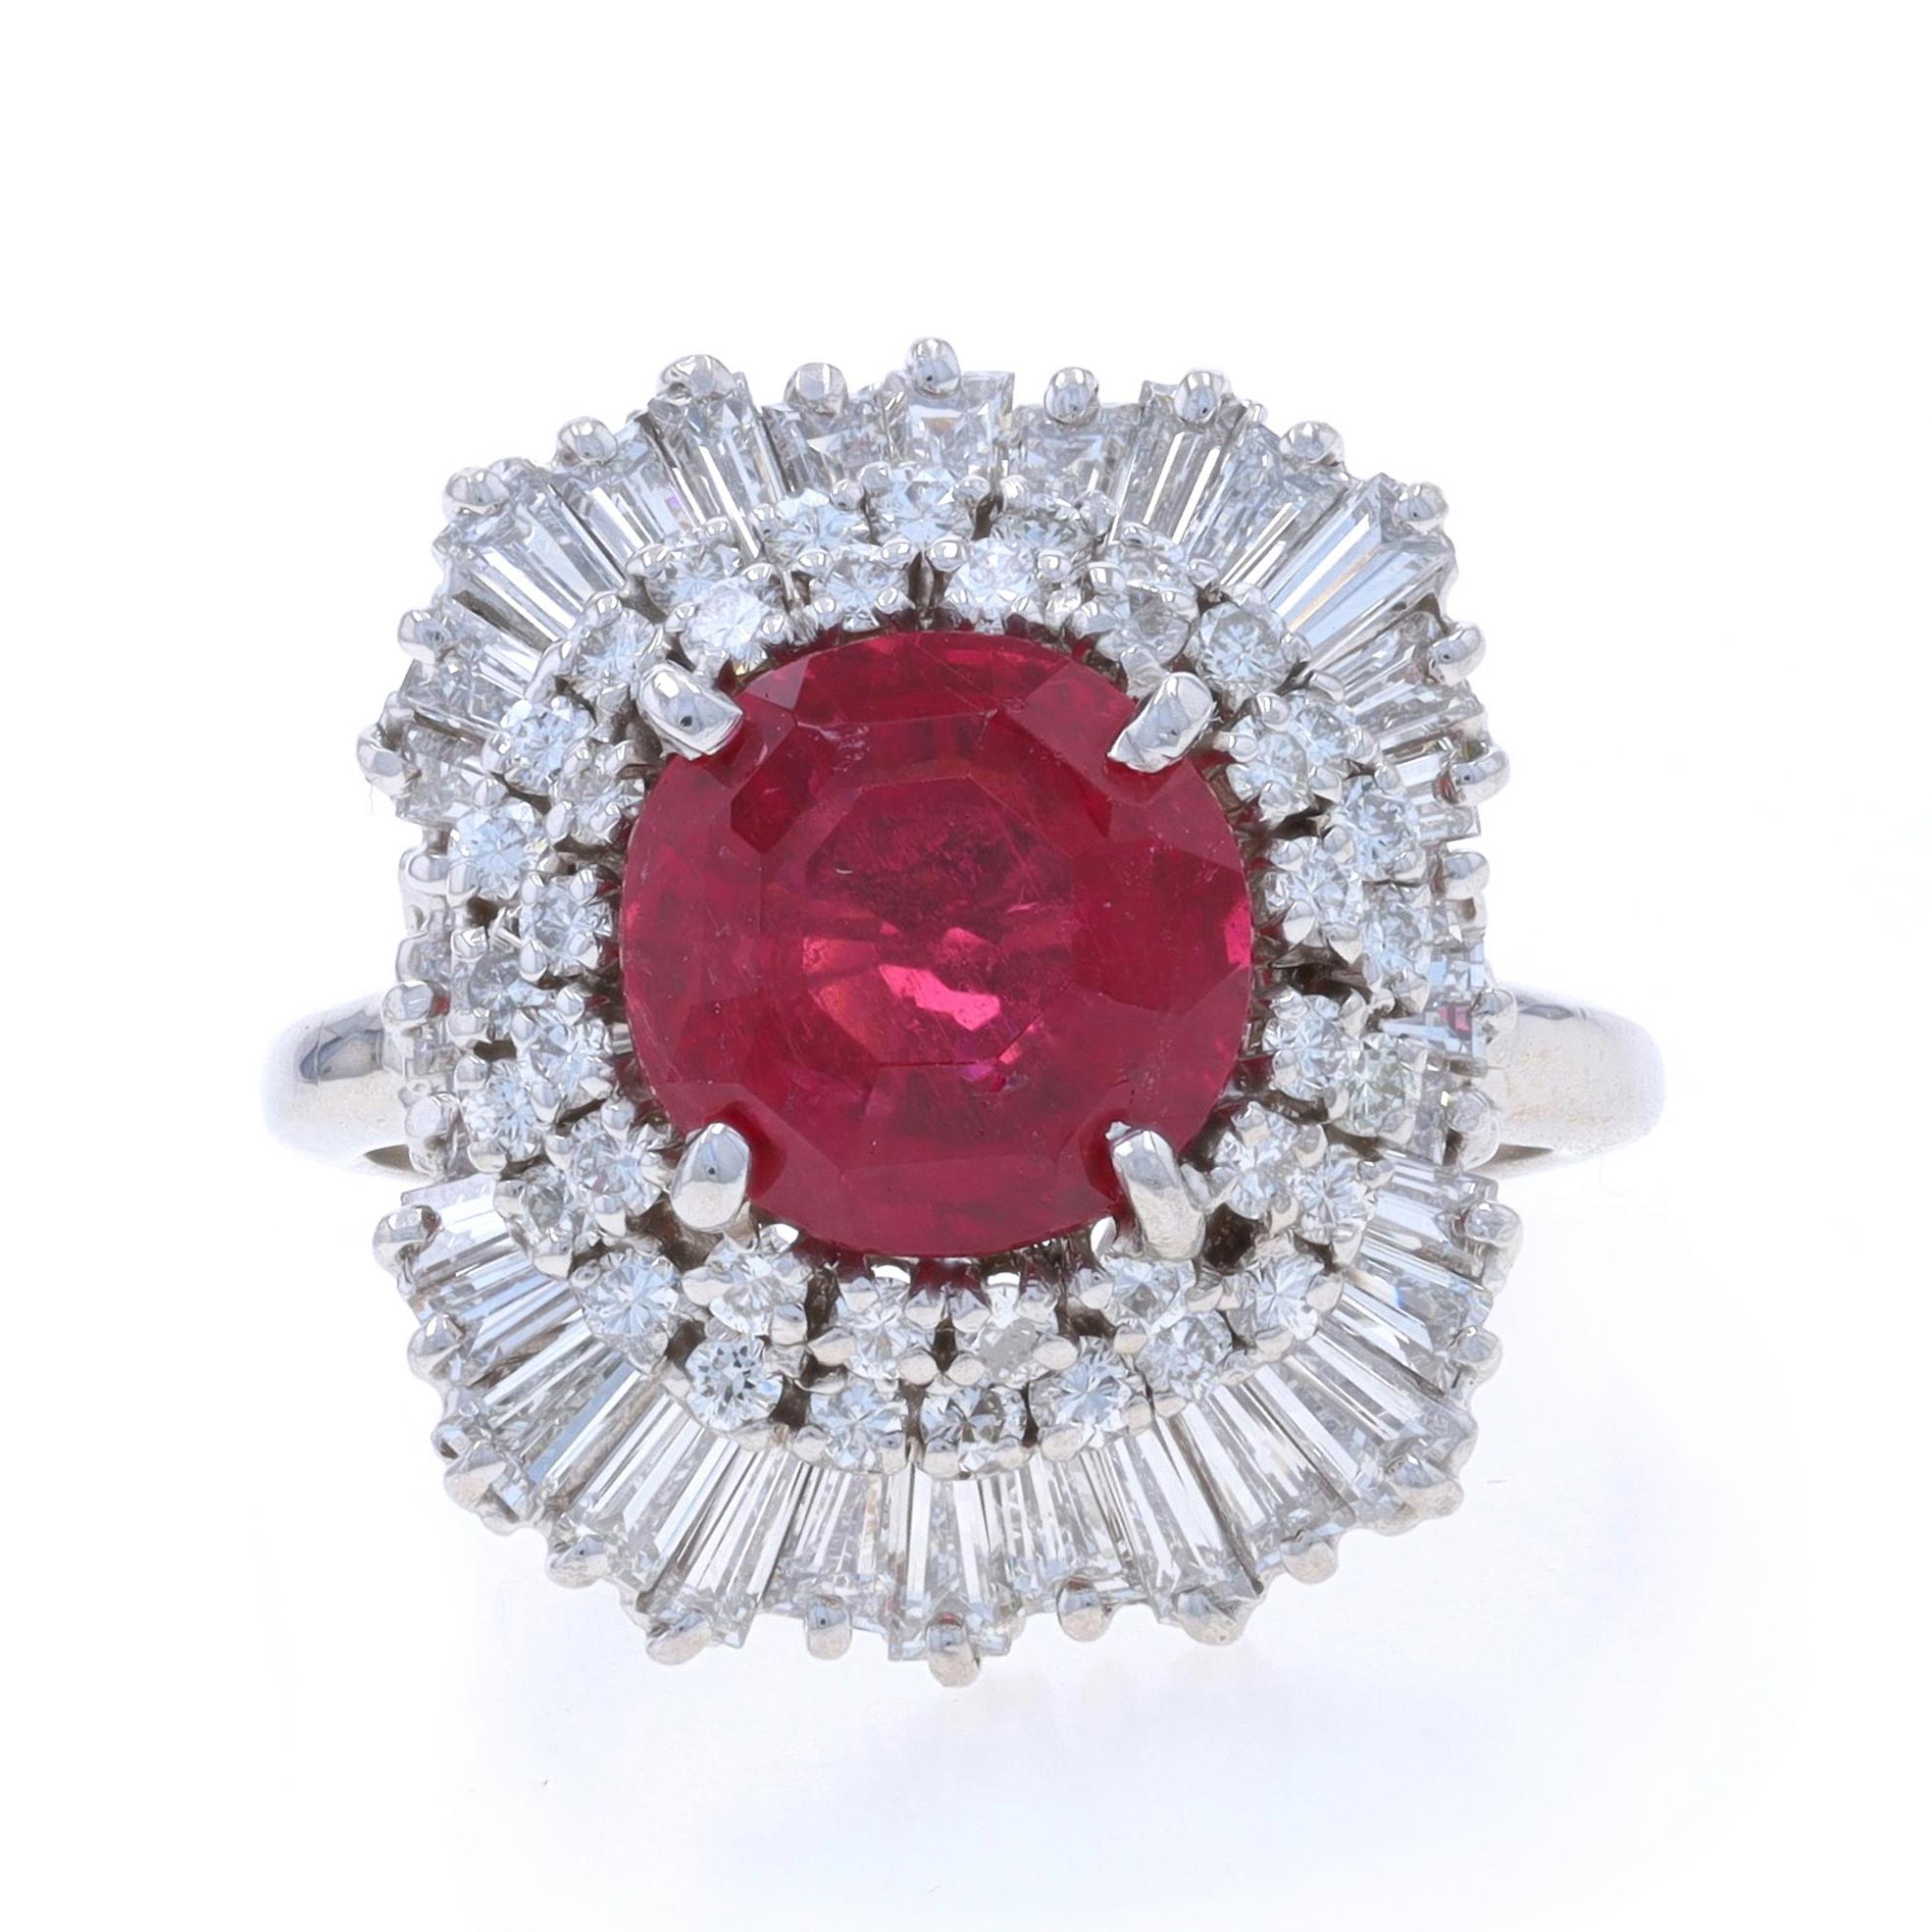 Size: 6
Sizing Fee: Up 3 sizes for $50 or Down 1 size for $40

Era: Vintage

Metal Content: 14k White Gold (band) & Platinum (top)

Stone Information

Natural Rubellite Tourmaline
Carat(s): 2.72ct
Cut: Round
Color: Pink

Natural Diamonds
Carat(s):